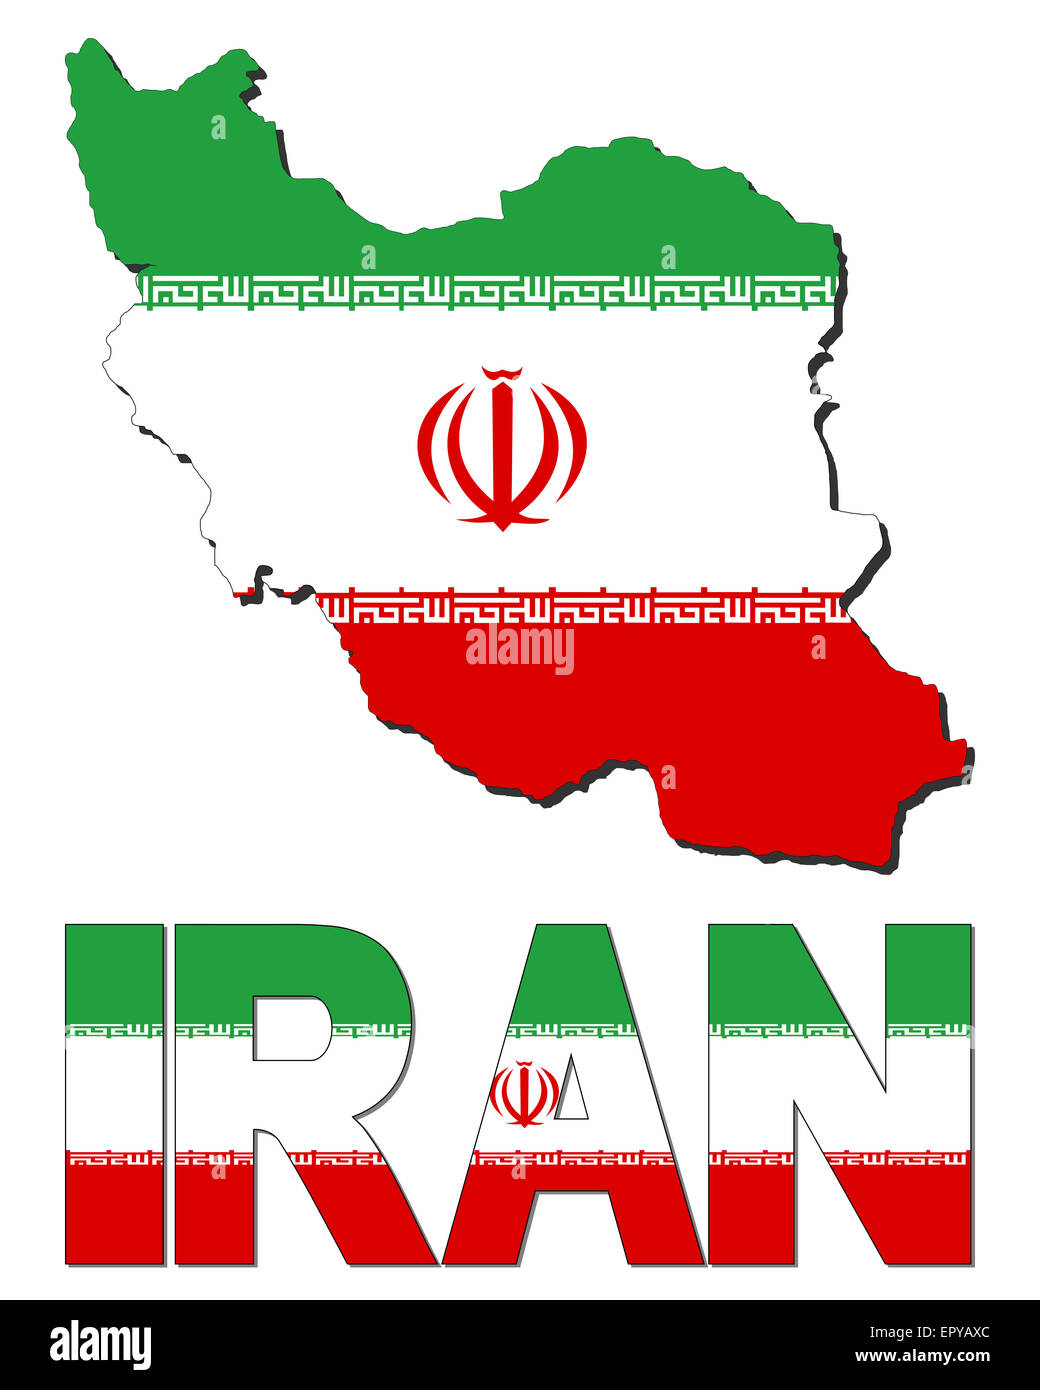 Iran map flag and text illustration Stock Photo